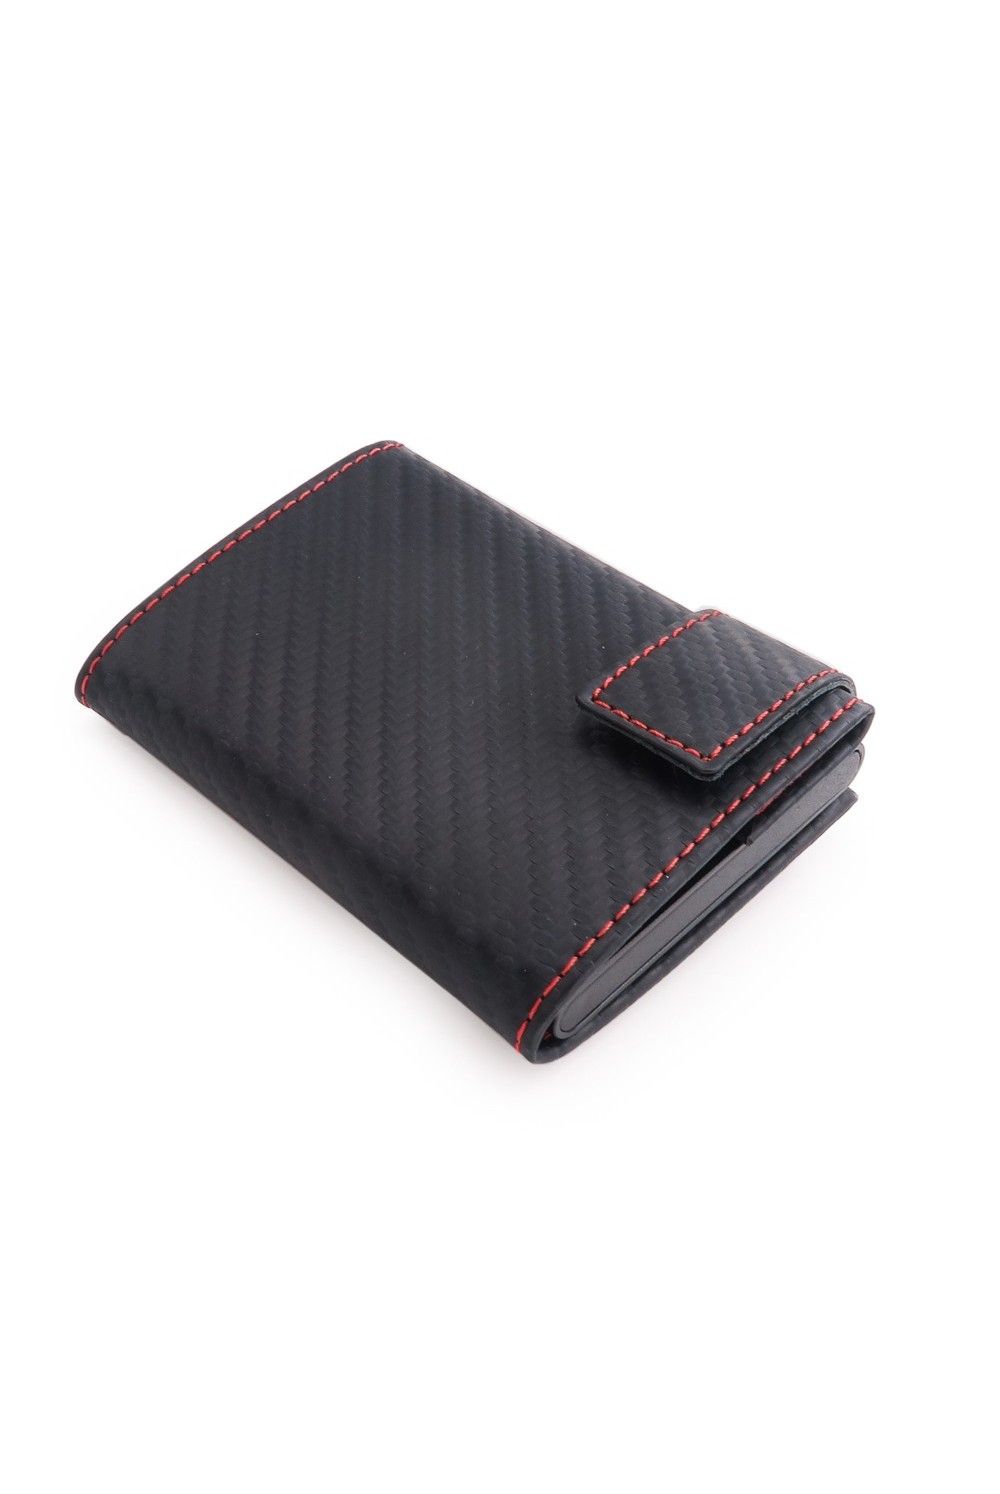 SecWal Card Case RV Leather Carbon Black-Red